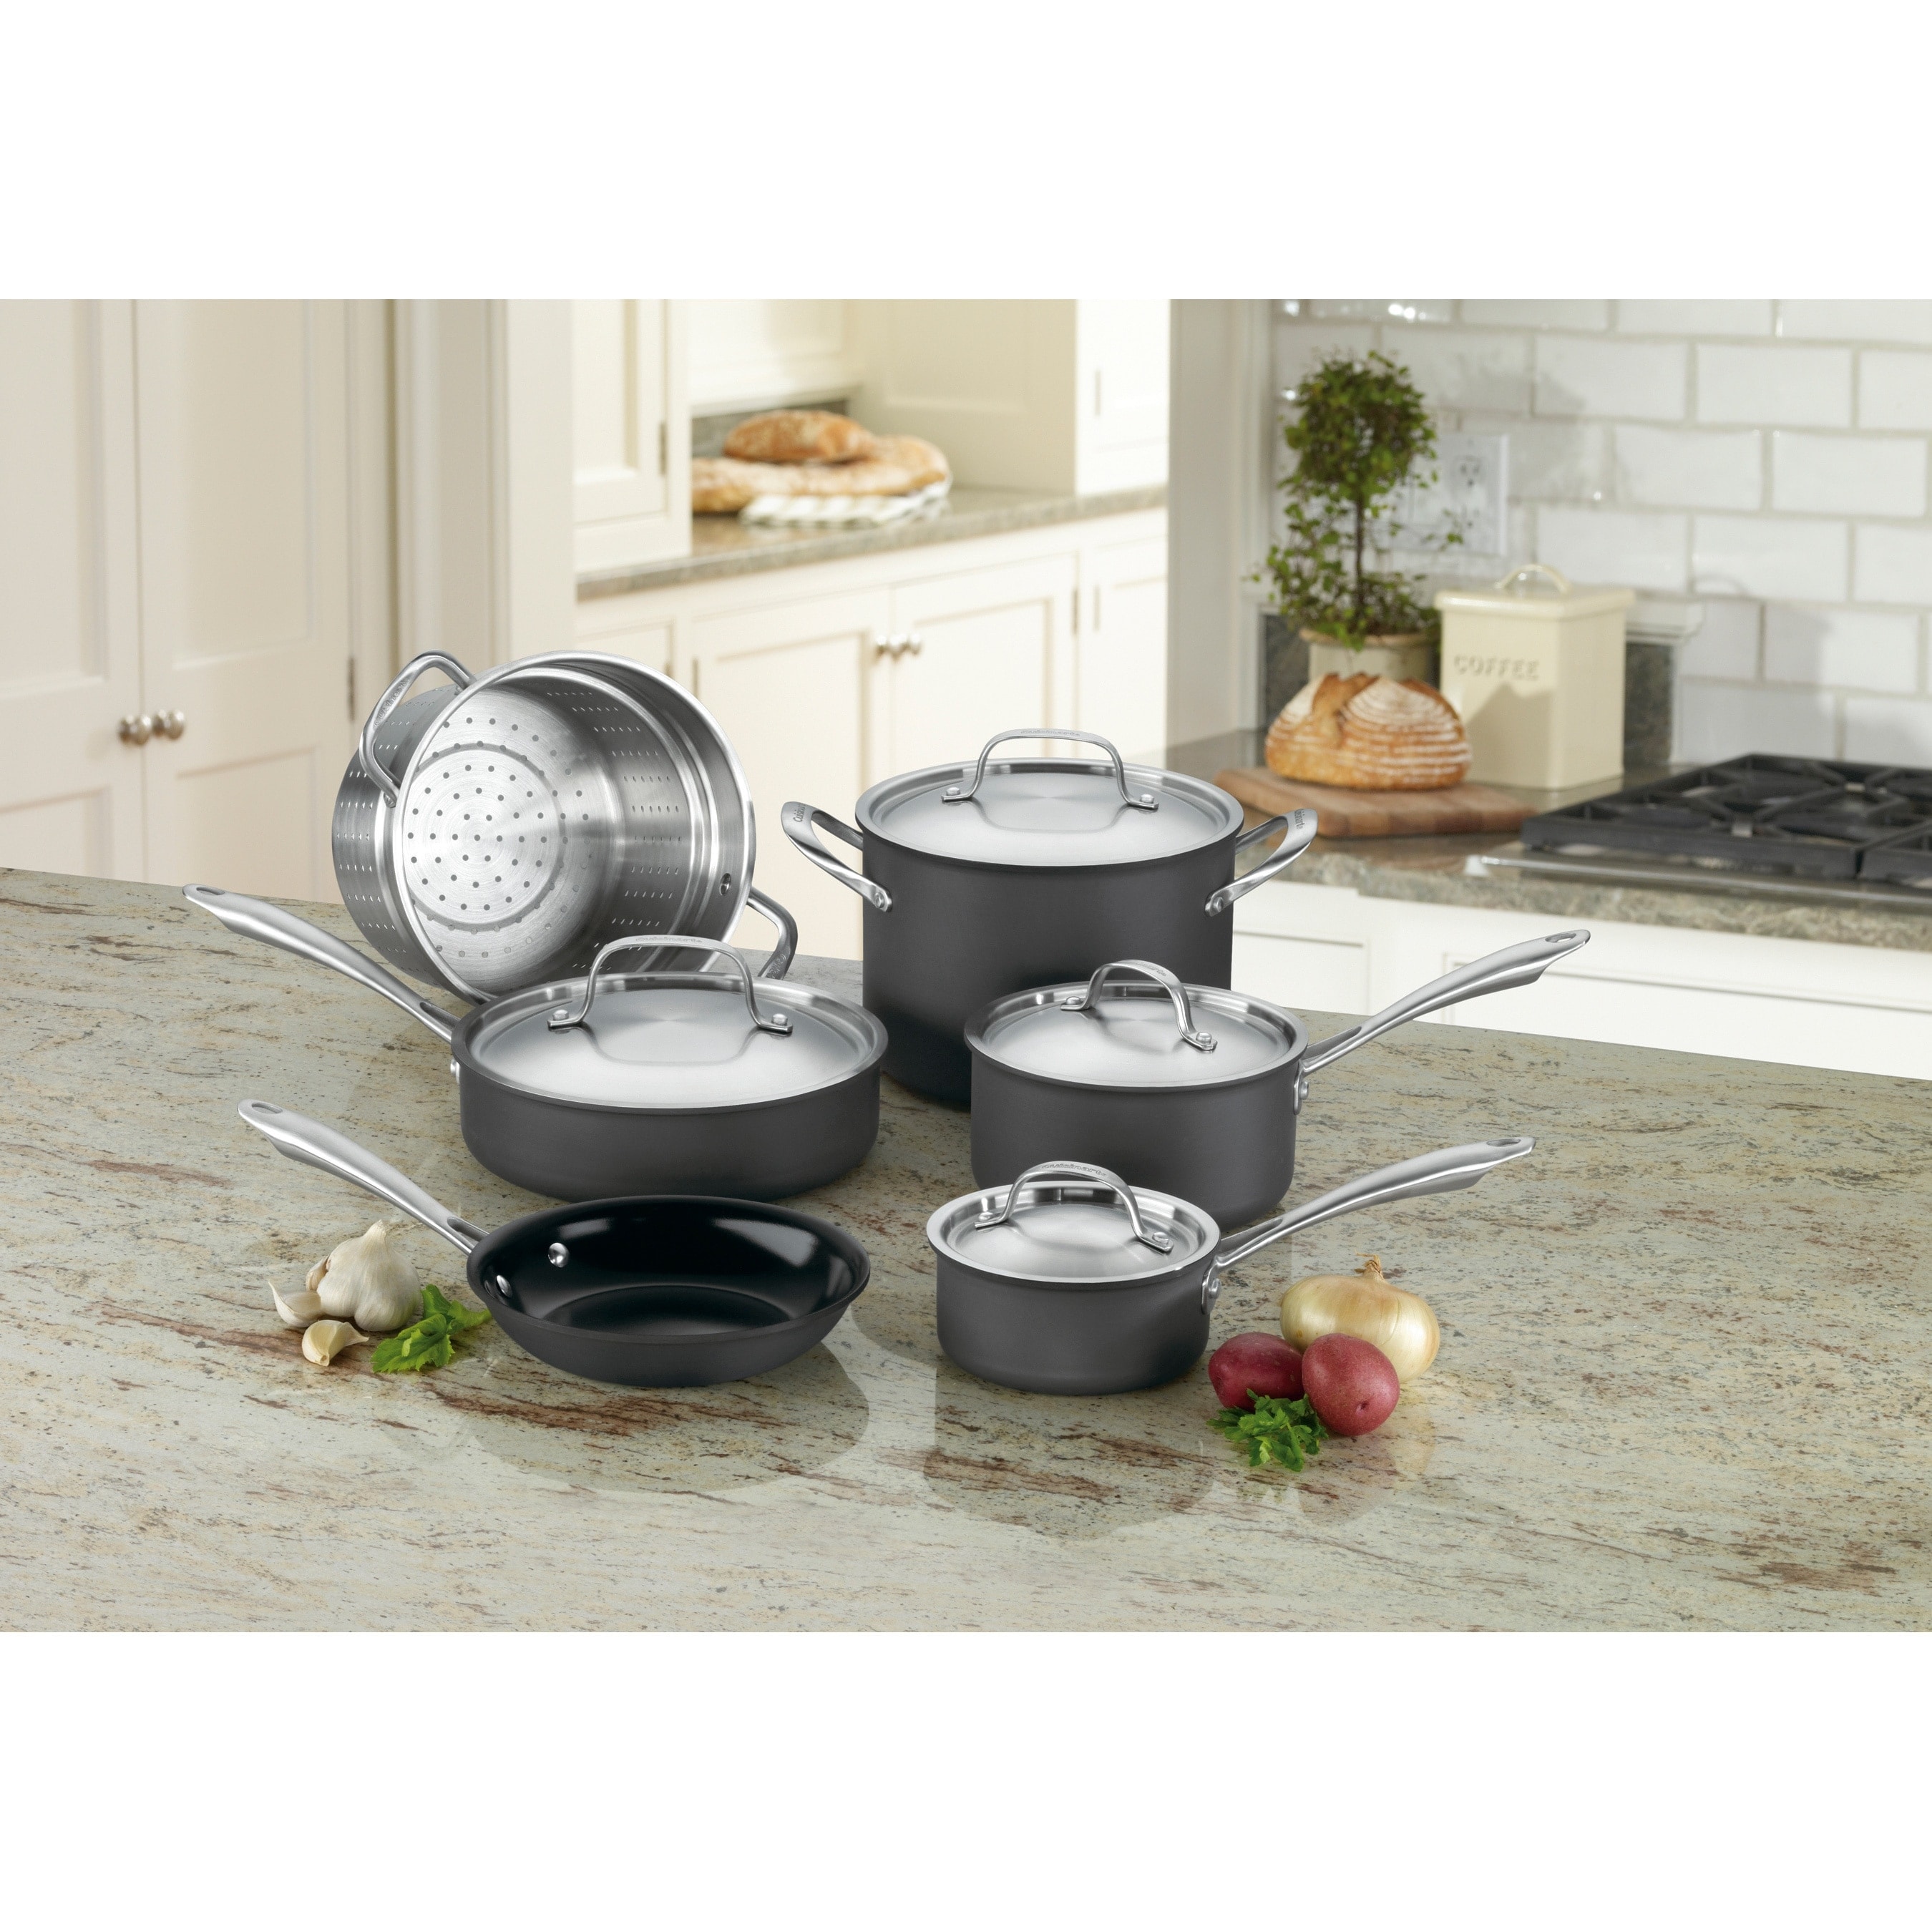 Cuisinart 14-Piece Cookware Set, Chef's Classic NonStick Hard Anodized,  Gray, 66-14N